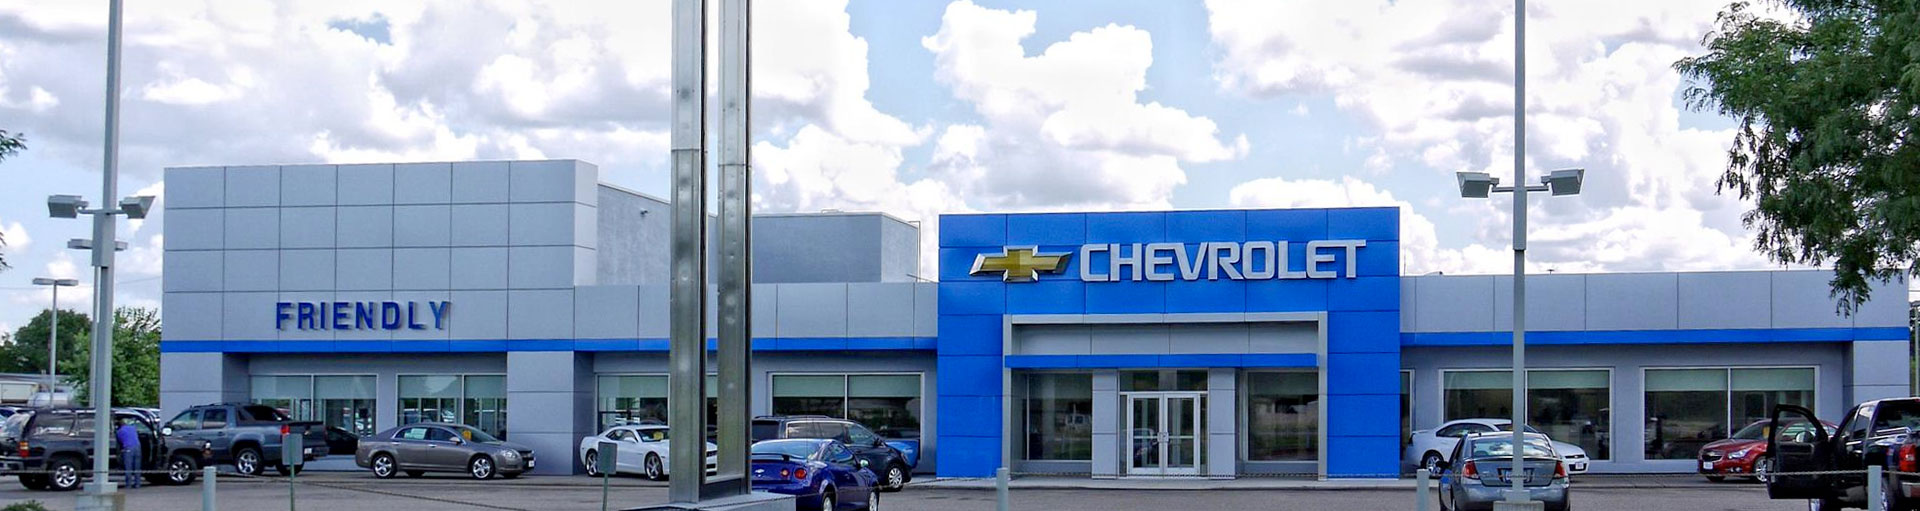 Friendly Chevrolet Insurance Claims